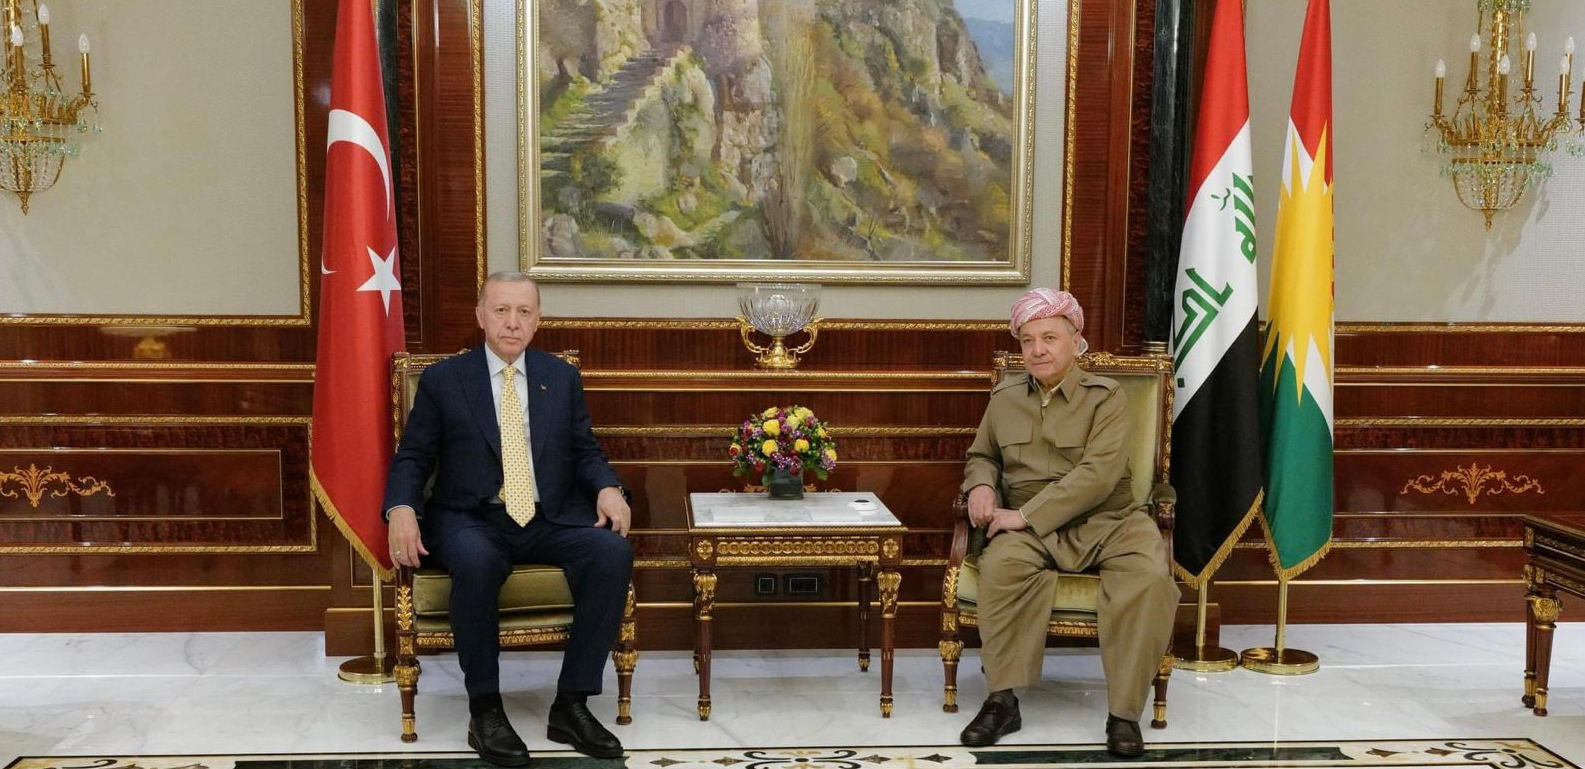 Masoud Barzani receives Erdogan and they hold a meeting